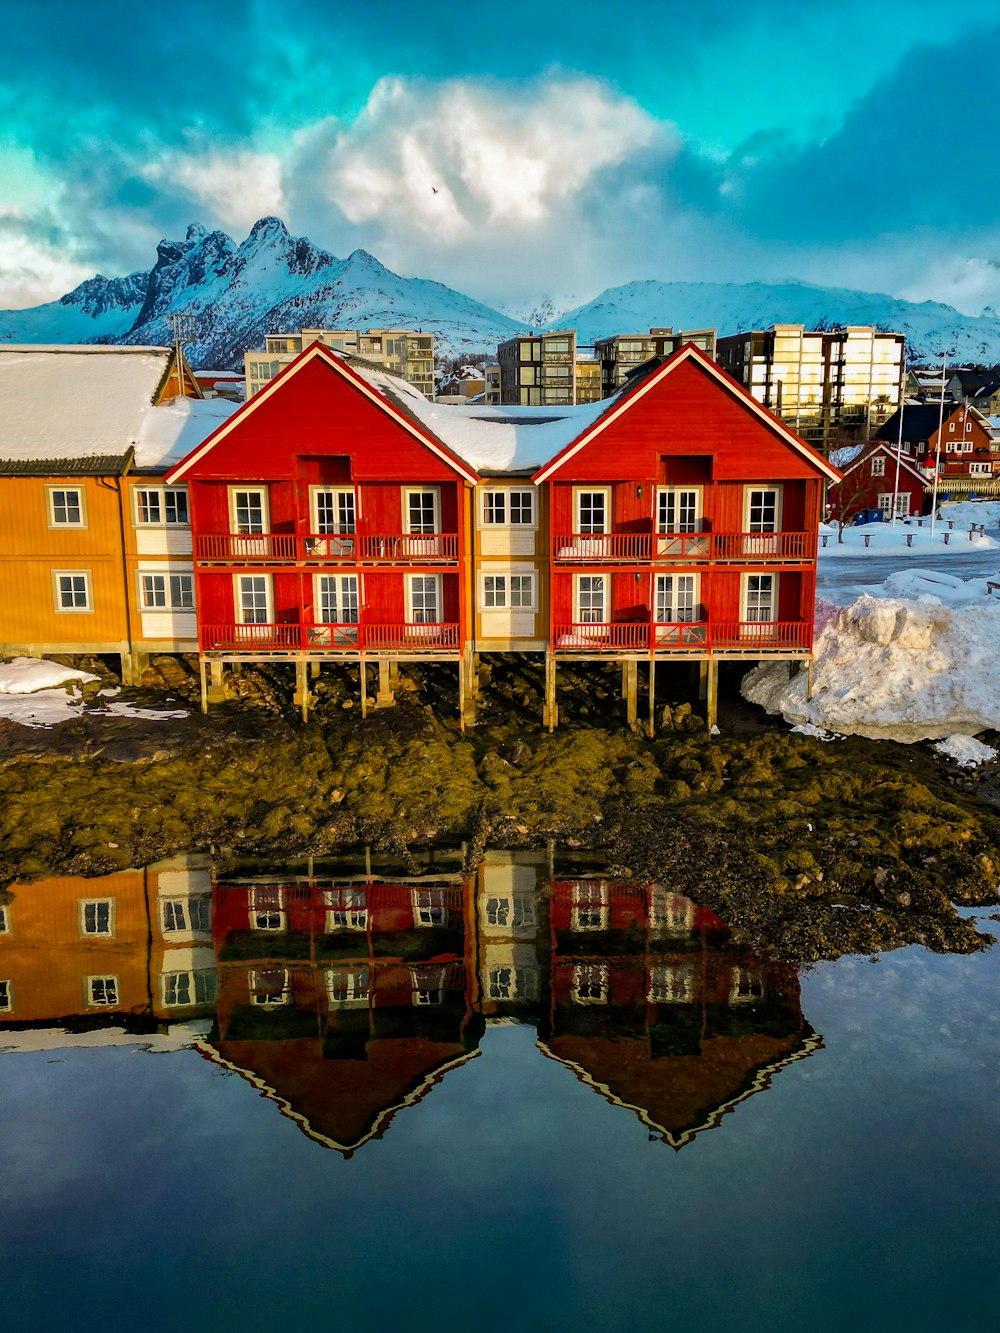 a group of red buildings sitting next to a body of water